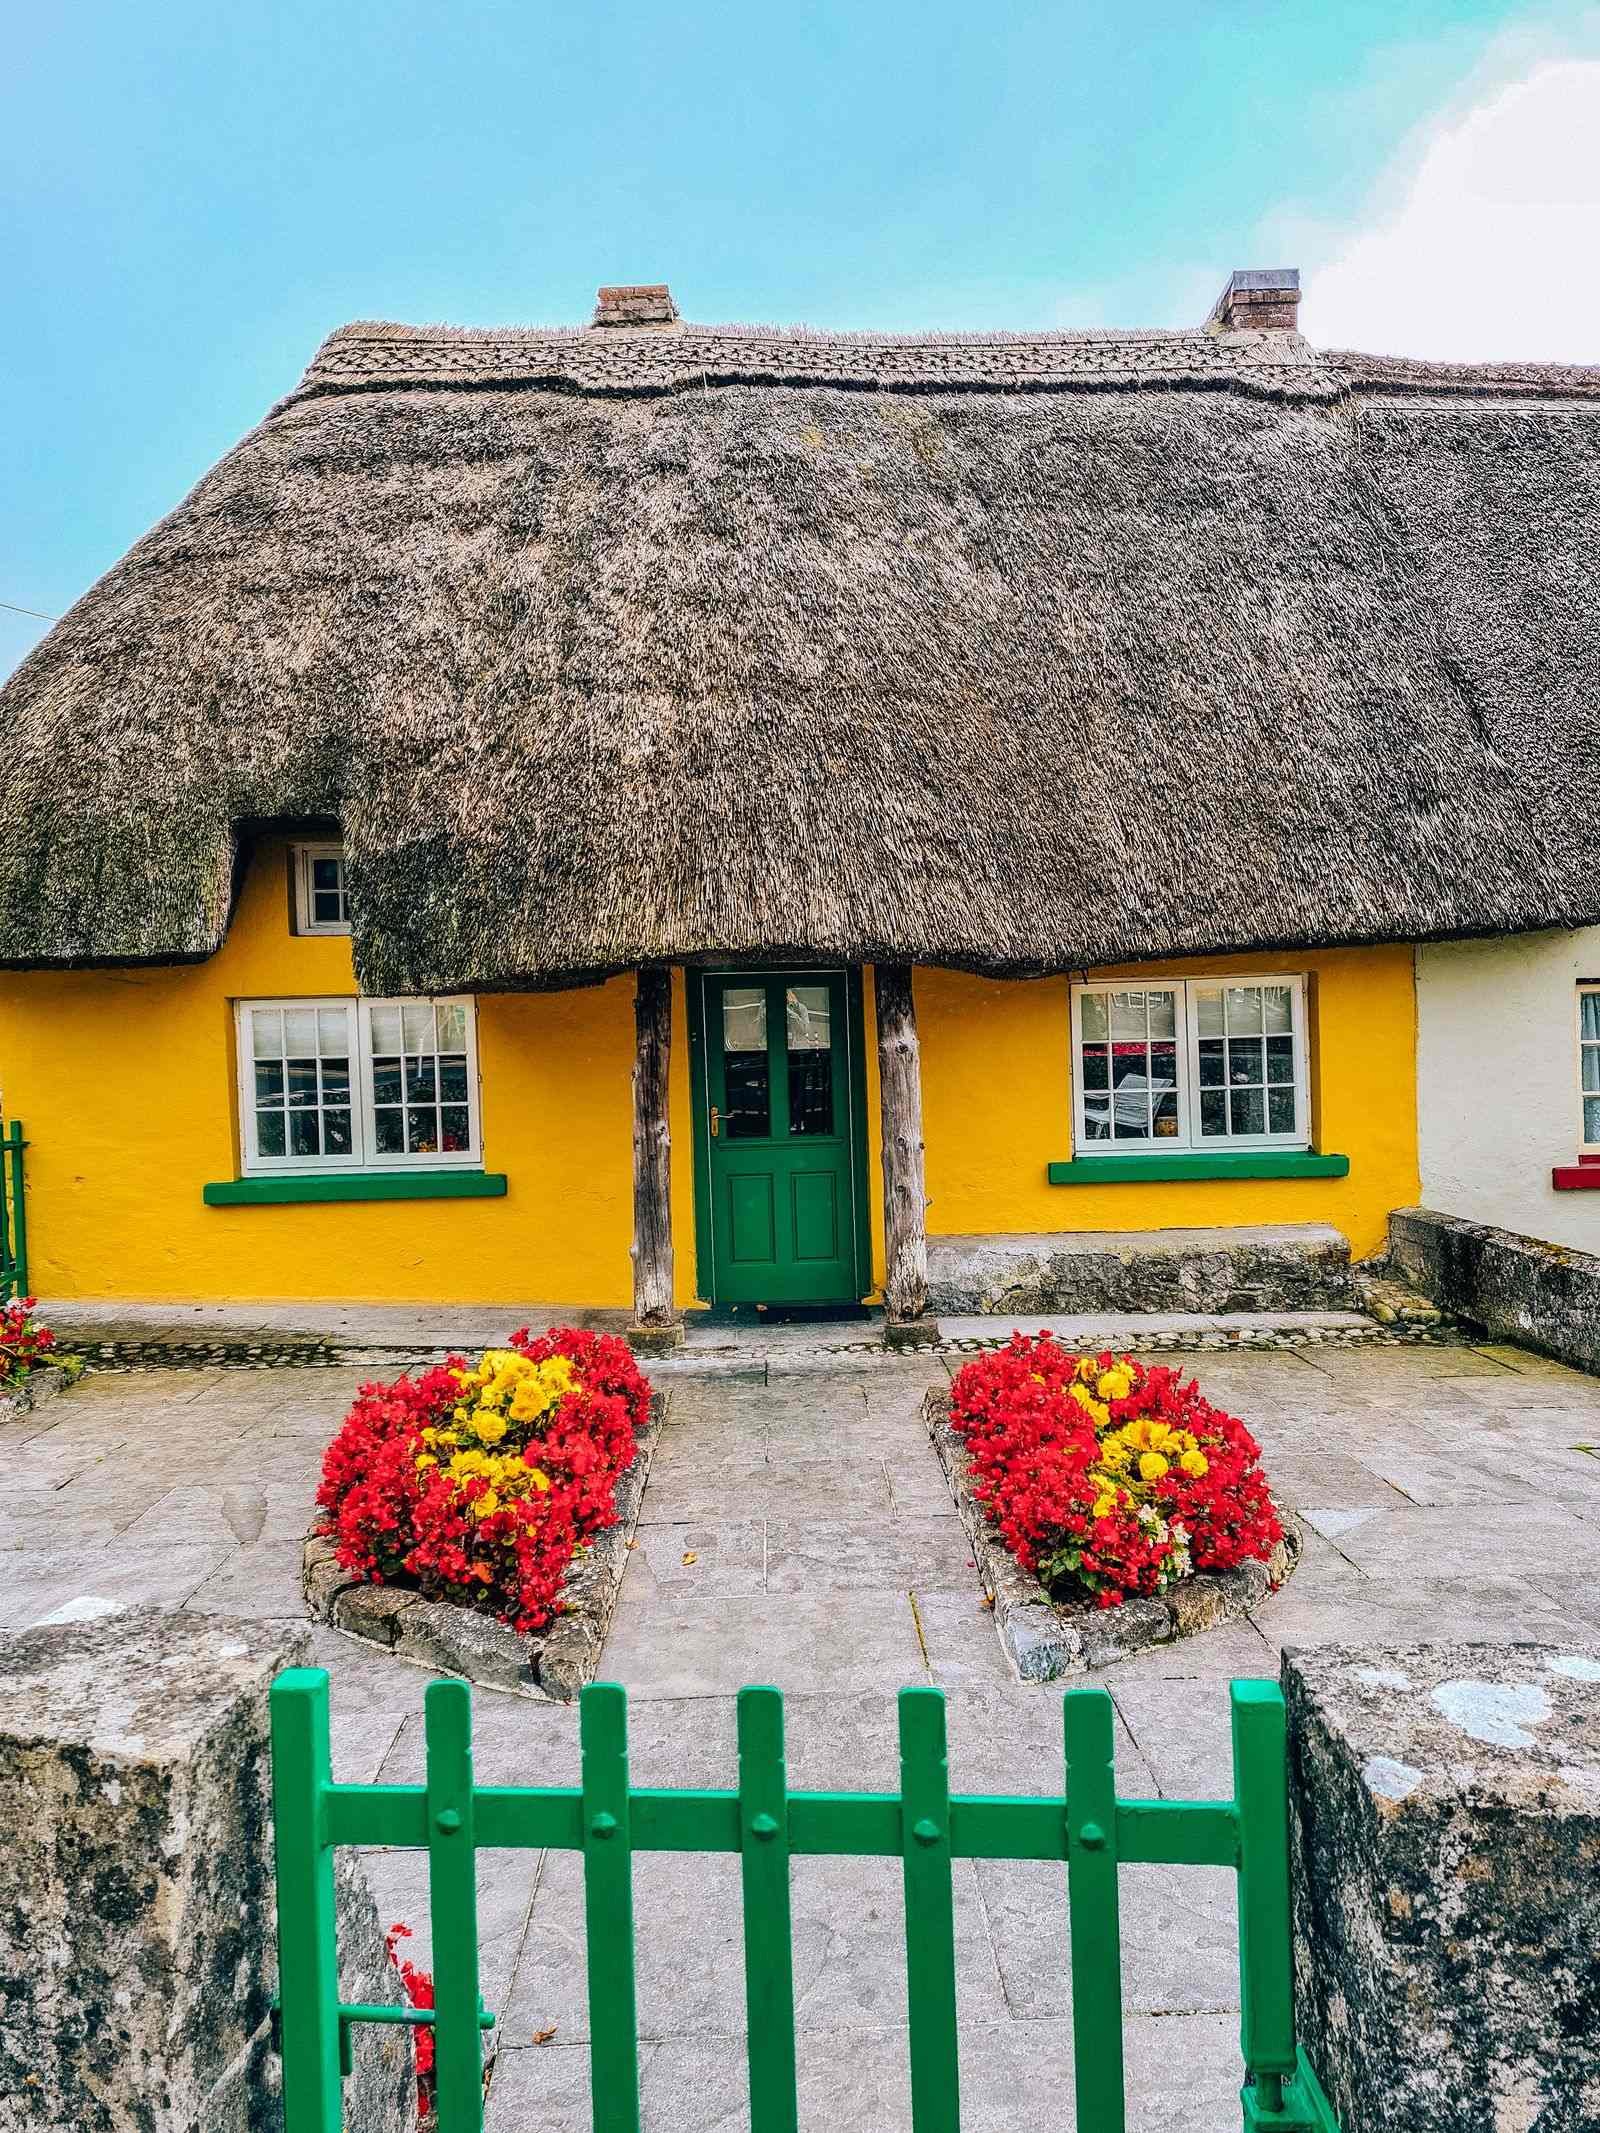 A yellow thatched cottage with a green door